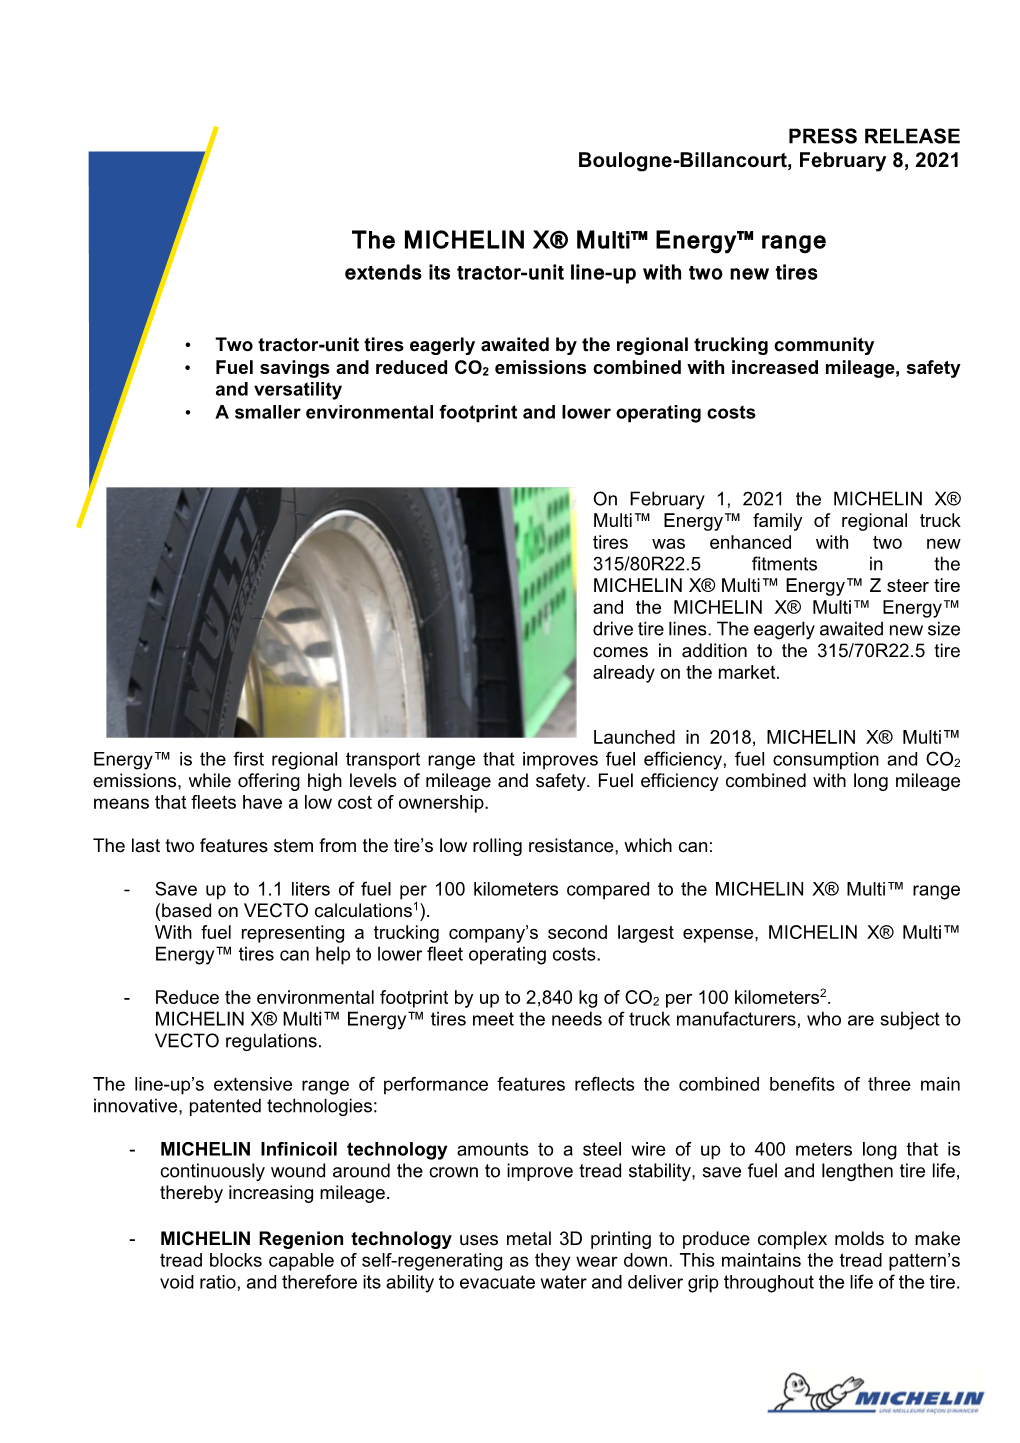 The MICHELIN X® Multi™ Energy™ Range Extends Its Tractor-Unit Line-Up with Two New Tires